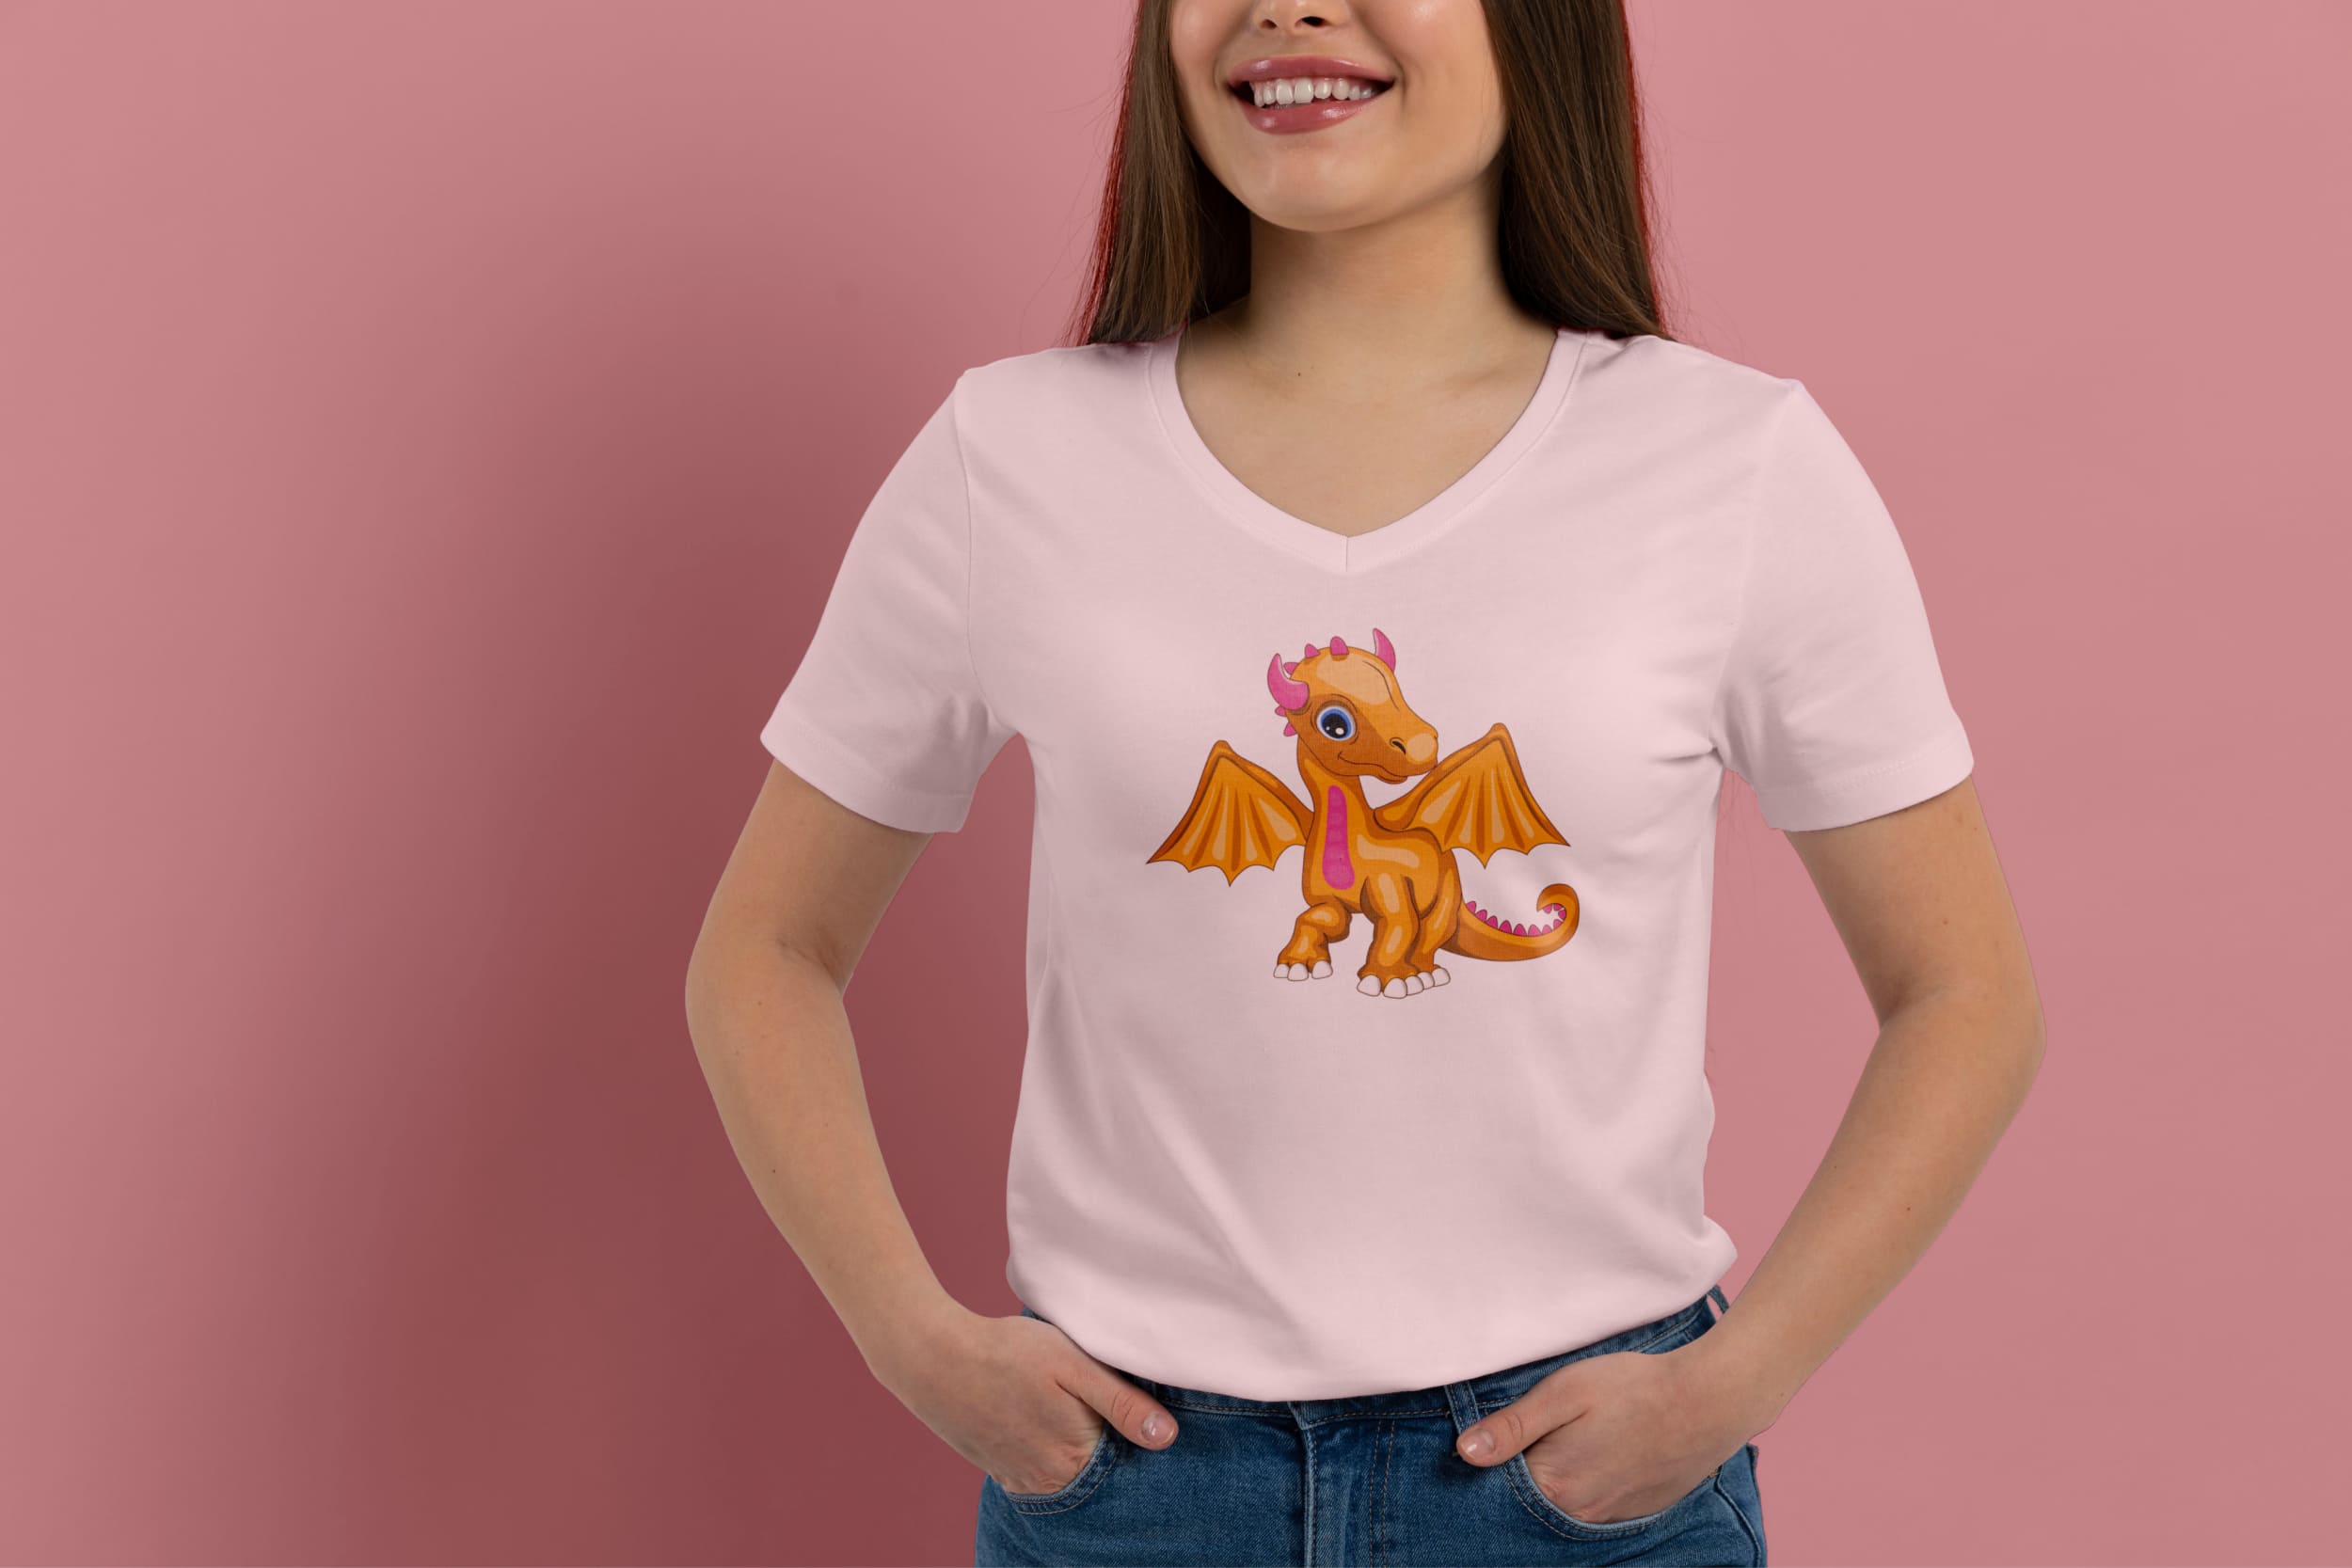 Light pink t-shirt on a girl with an orange baby dragon, on a pink background.